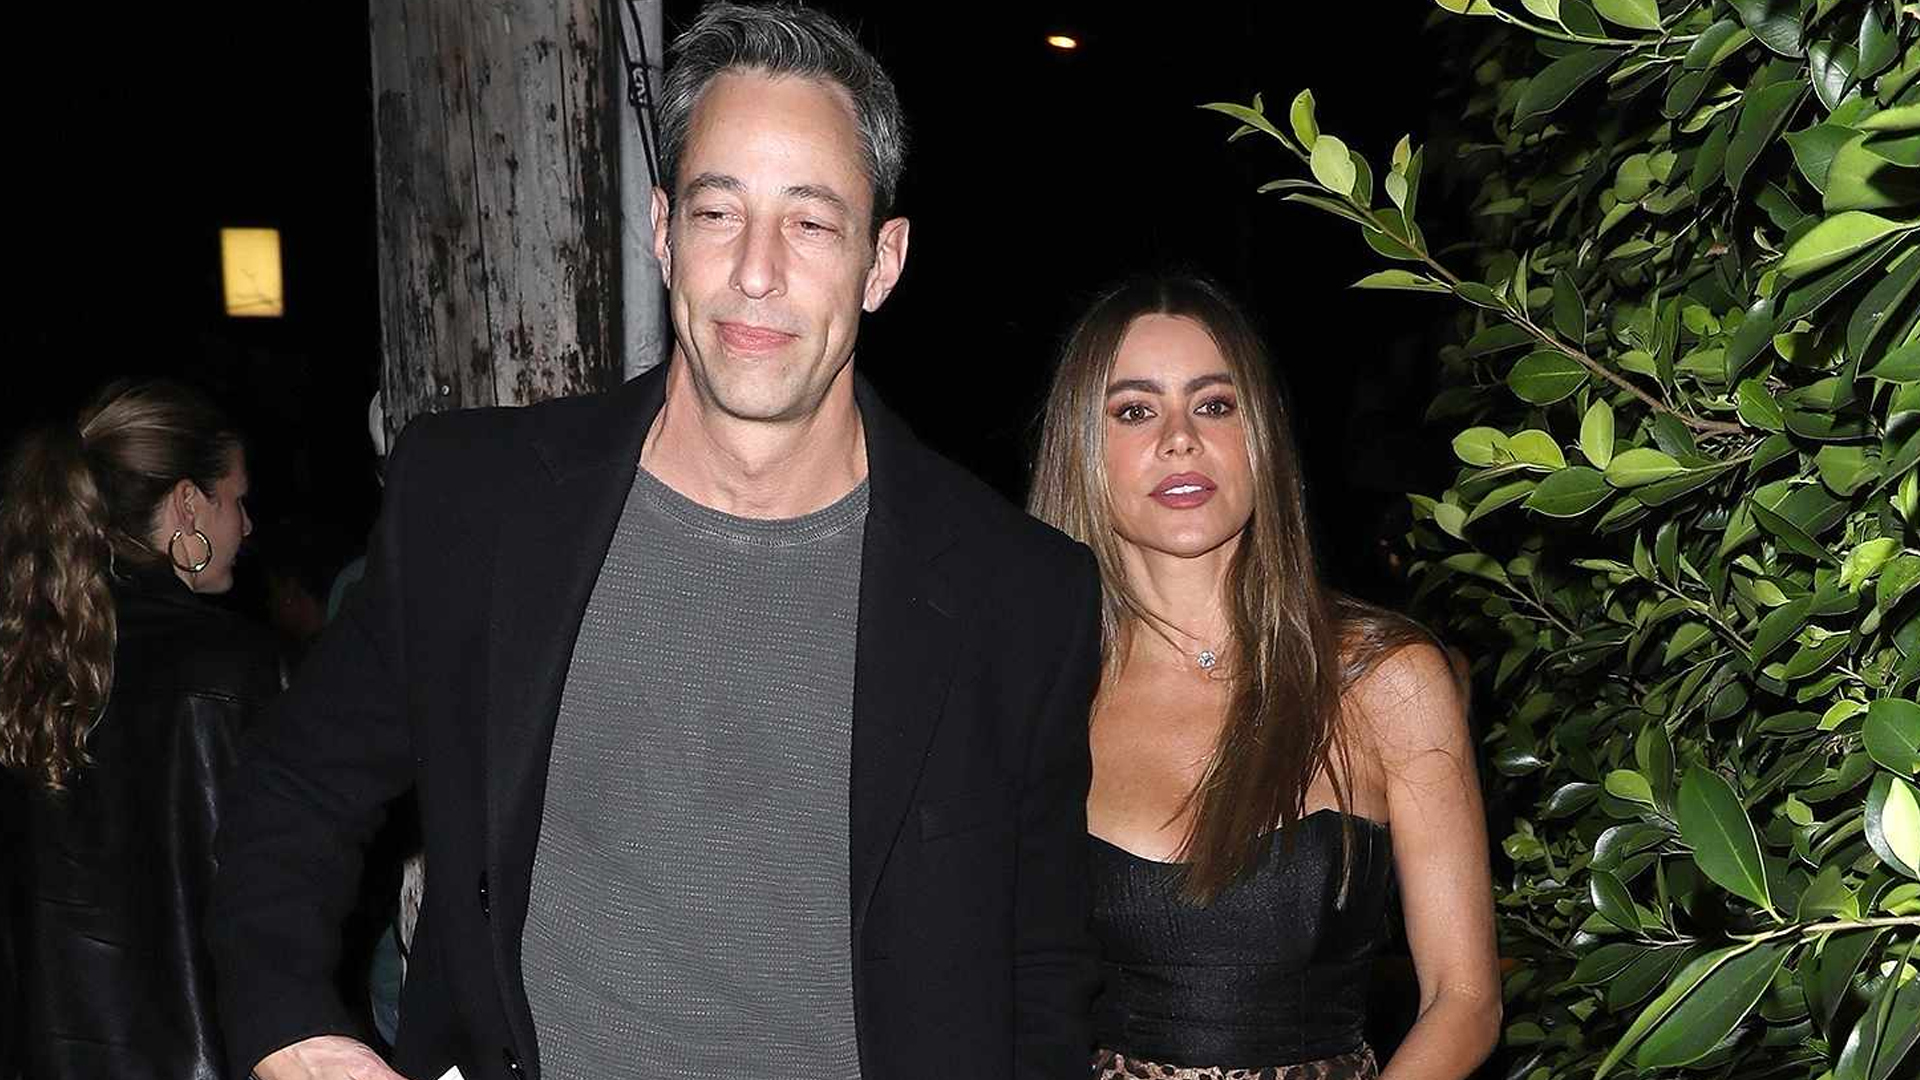 Sofia Vergara and Justin Saliman Spotted on Another Dinner Date!